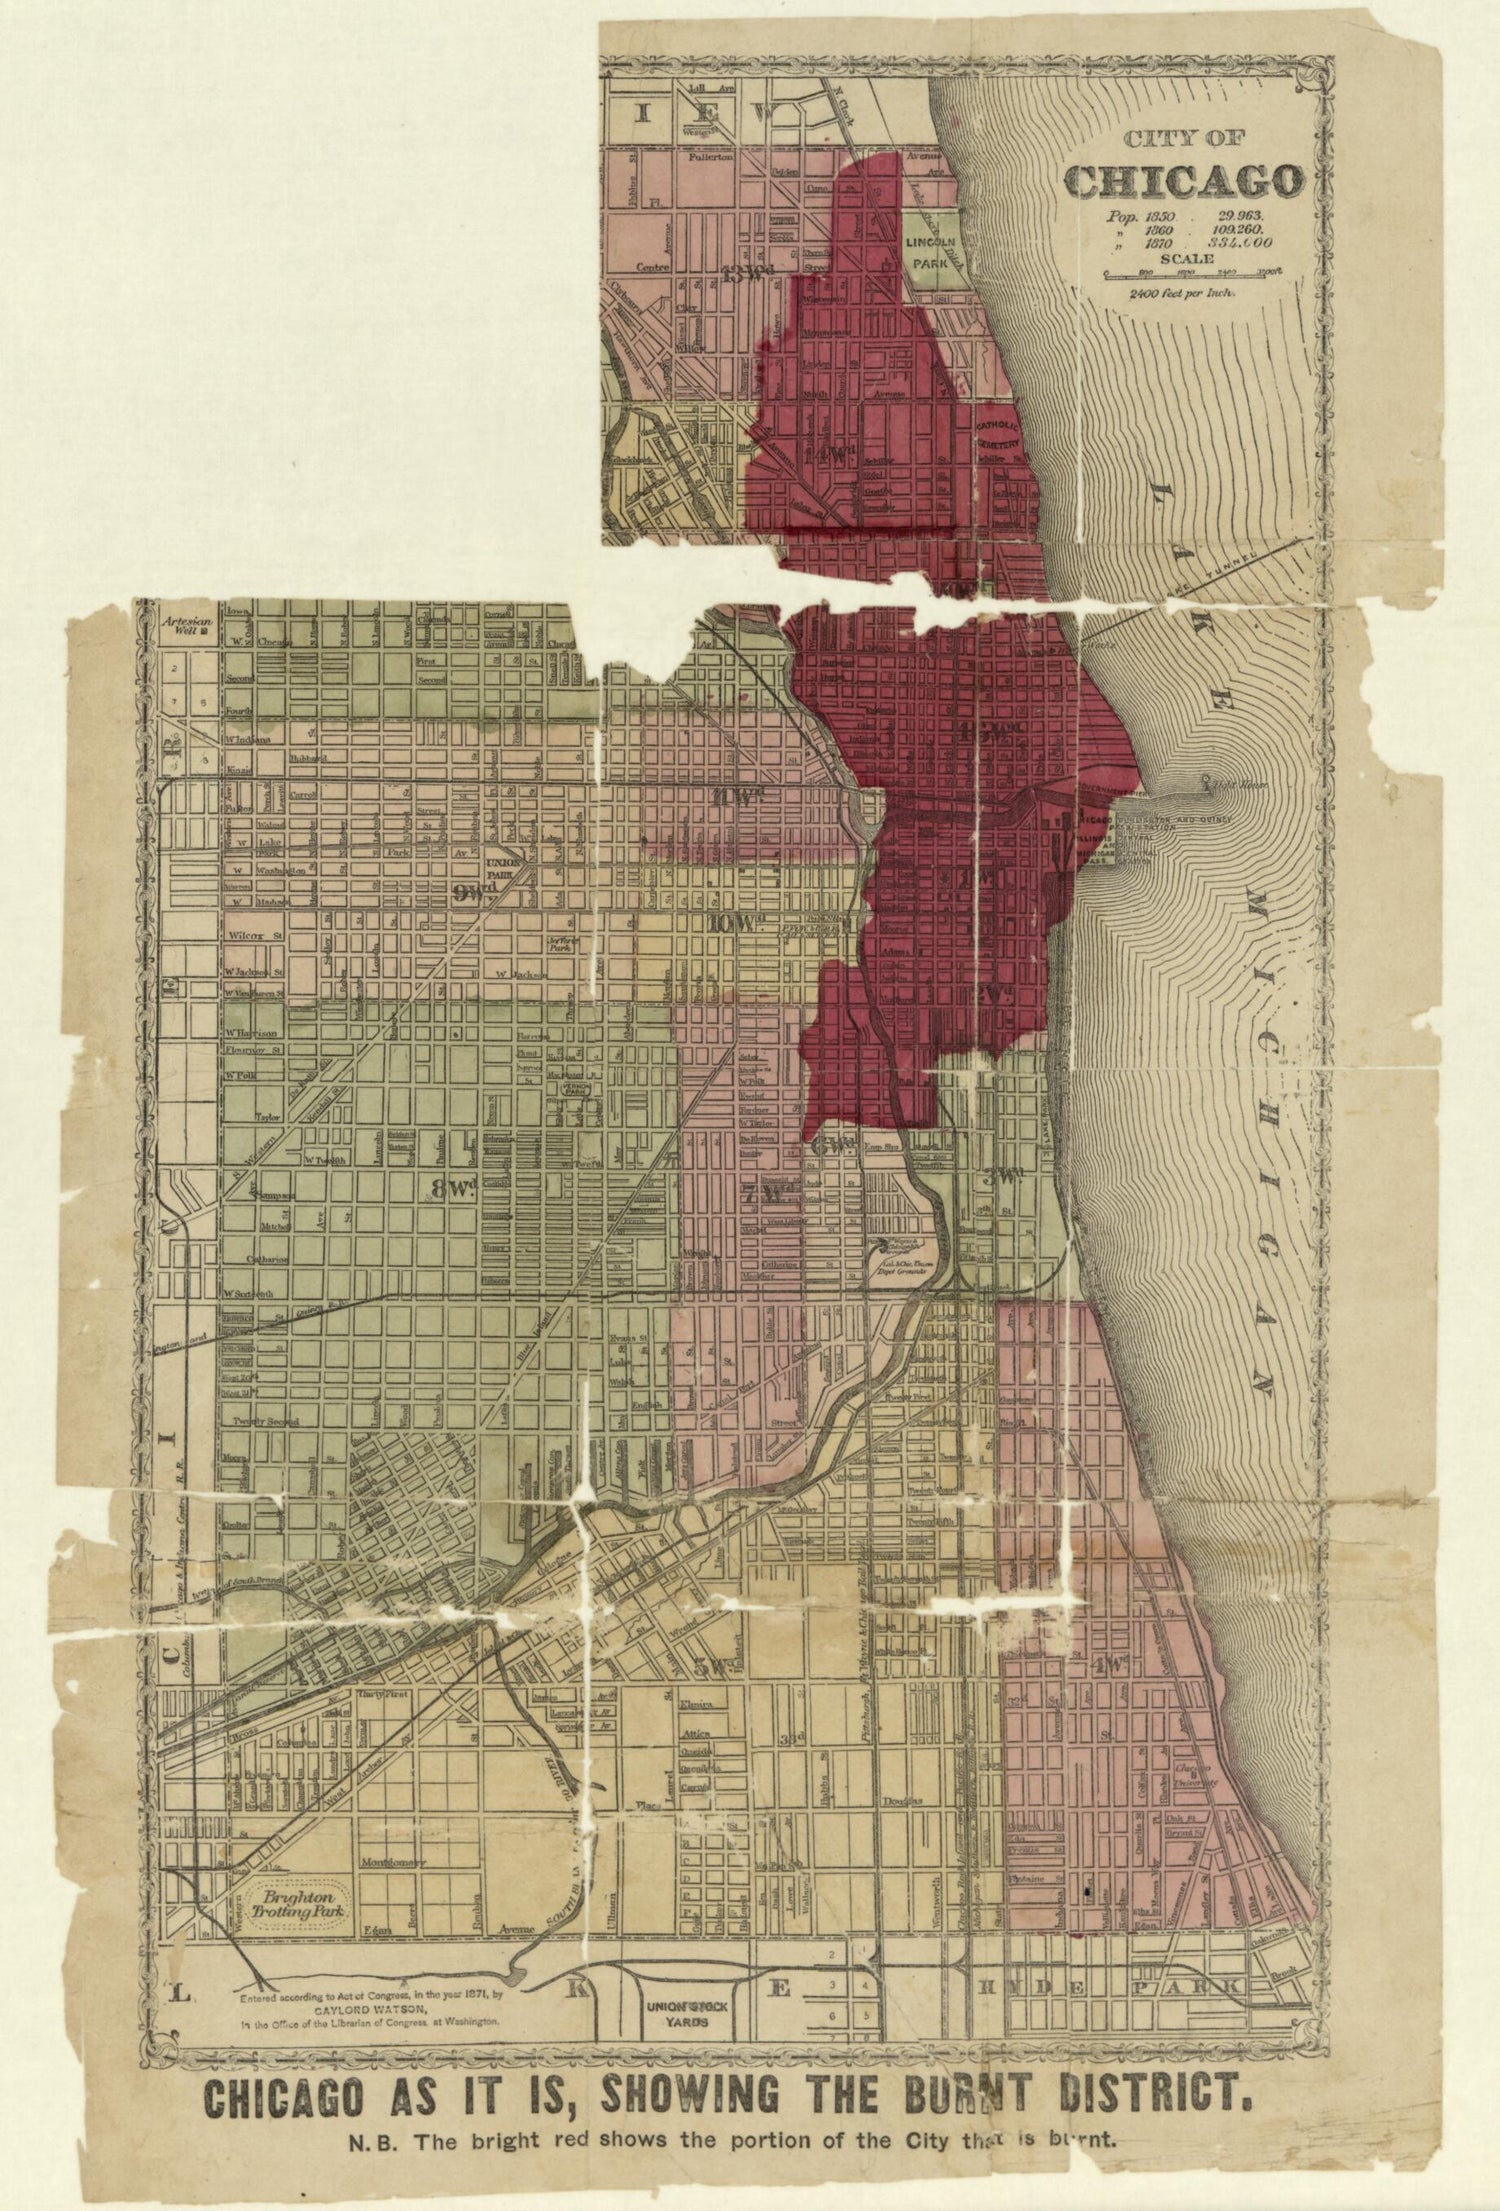 This old map of City of Chicago. (Chicago, As It Is, Showing the Burnt District) from 1871 was created by Gaylord Watson in 1871